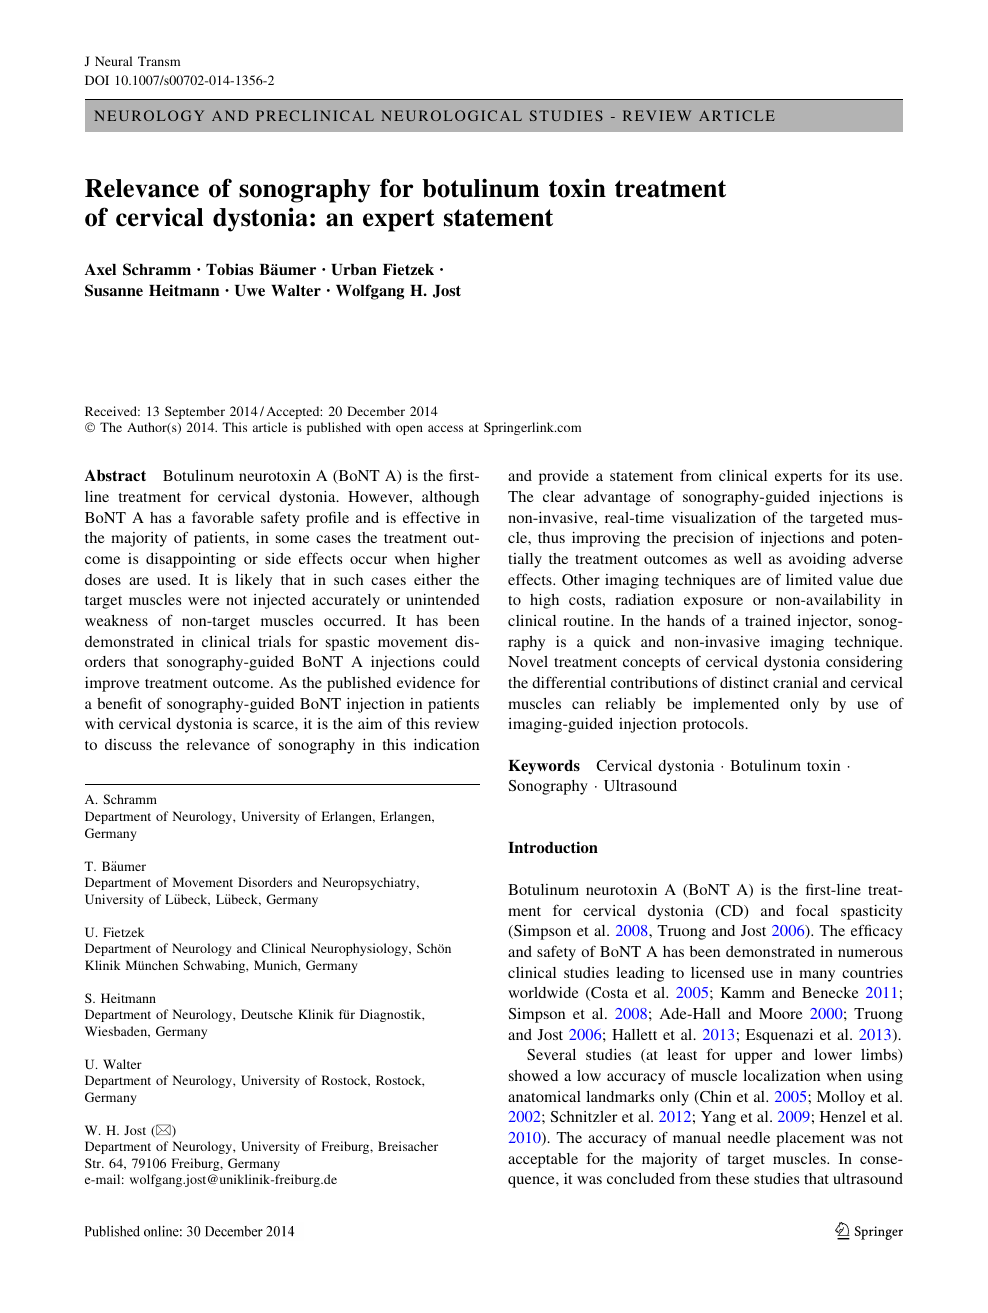 Relevance Of Sonography For Botulinum Toxin Treatment Of Cervical Dystonia An Expert Statement Topic Of Research Paper In Clinical Medicine Download Scholarly Article Pdf And Read For Free On Cyberleninka Open